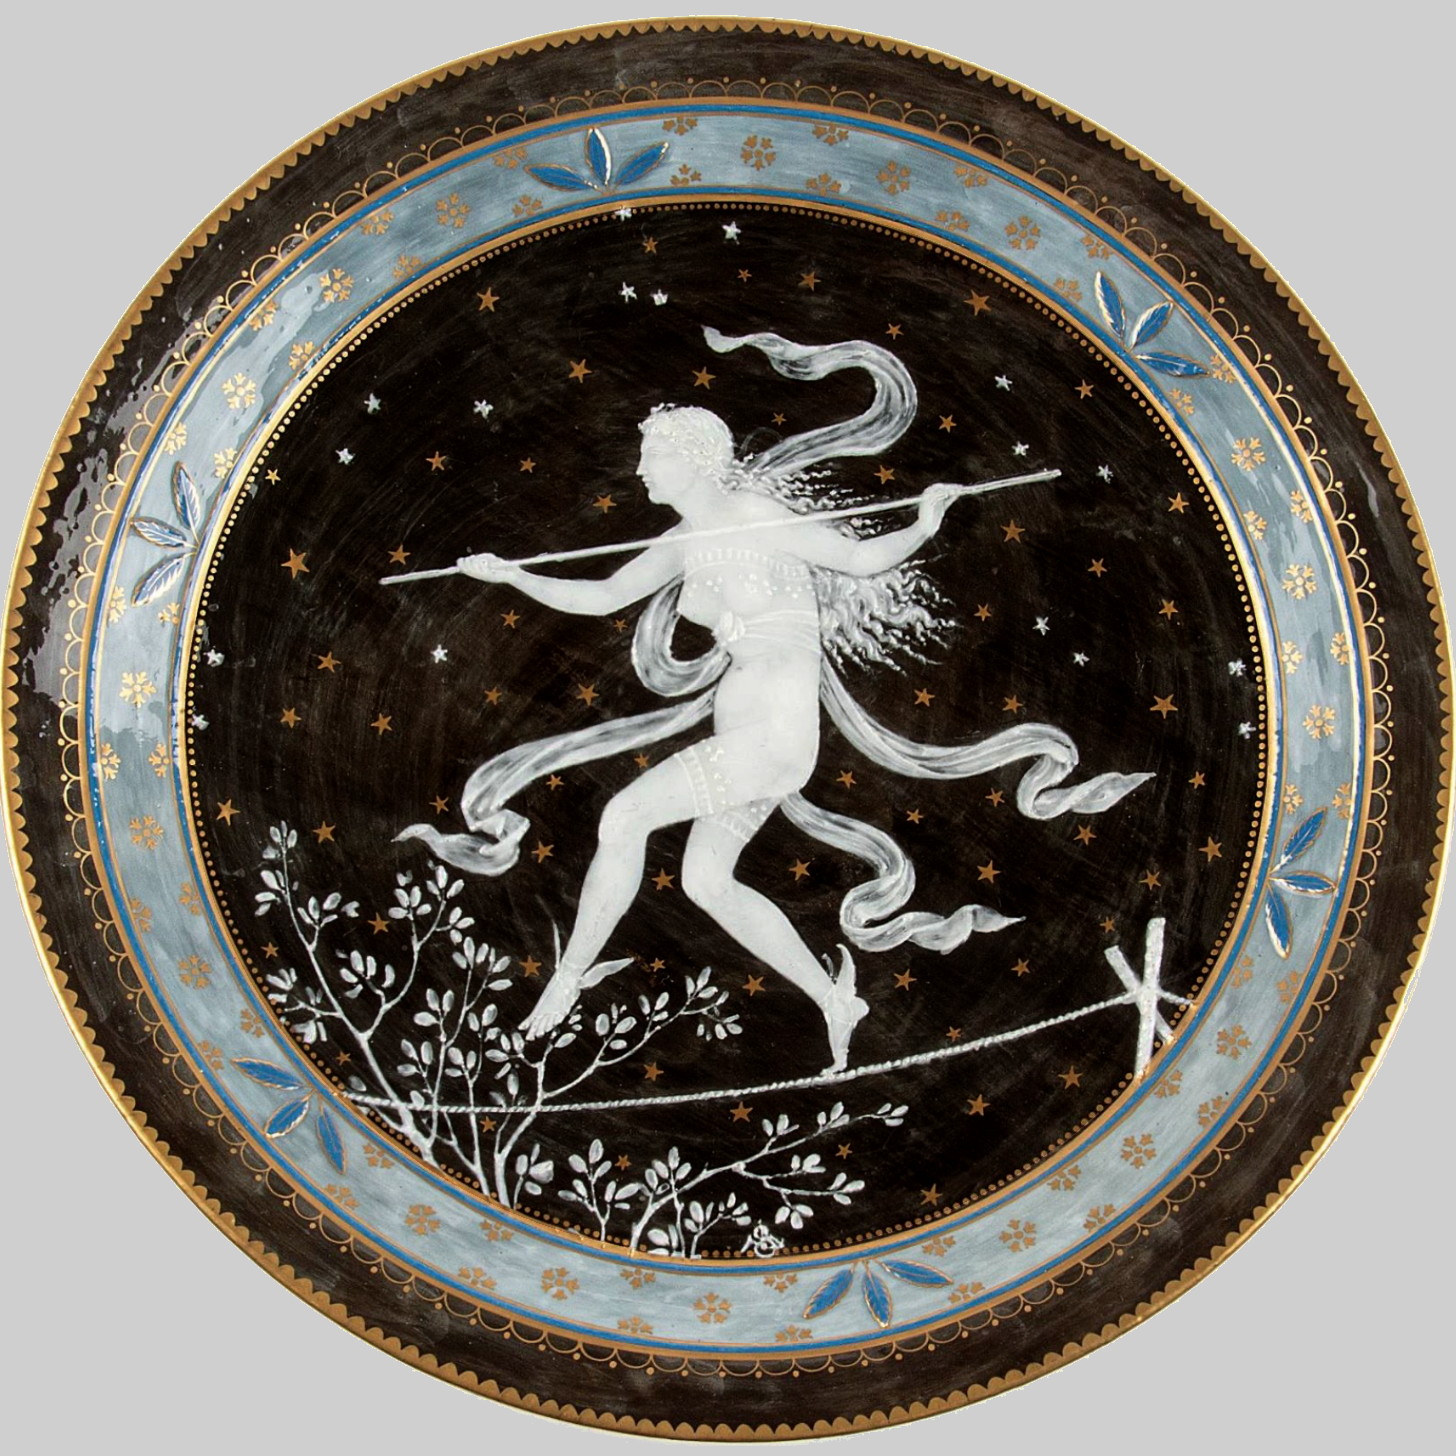 Minton pate-sur-pate plate by Solon depicting a young woman on tightrope